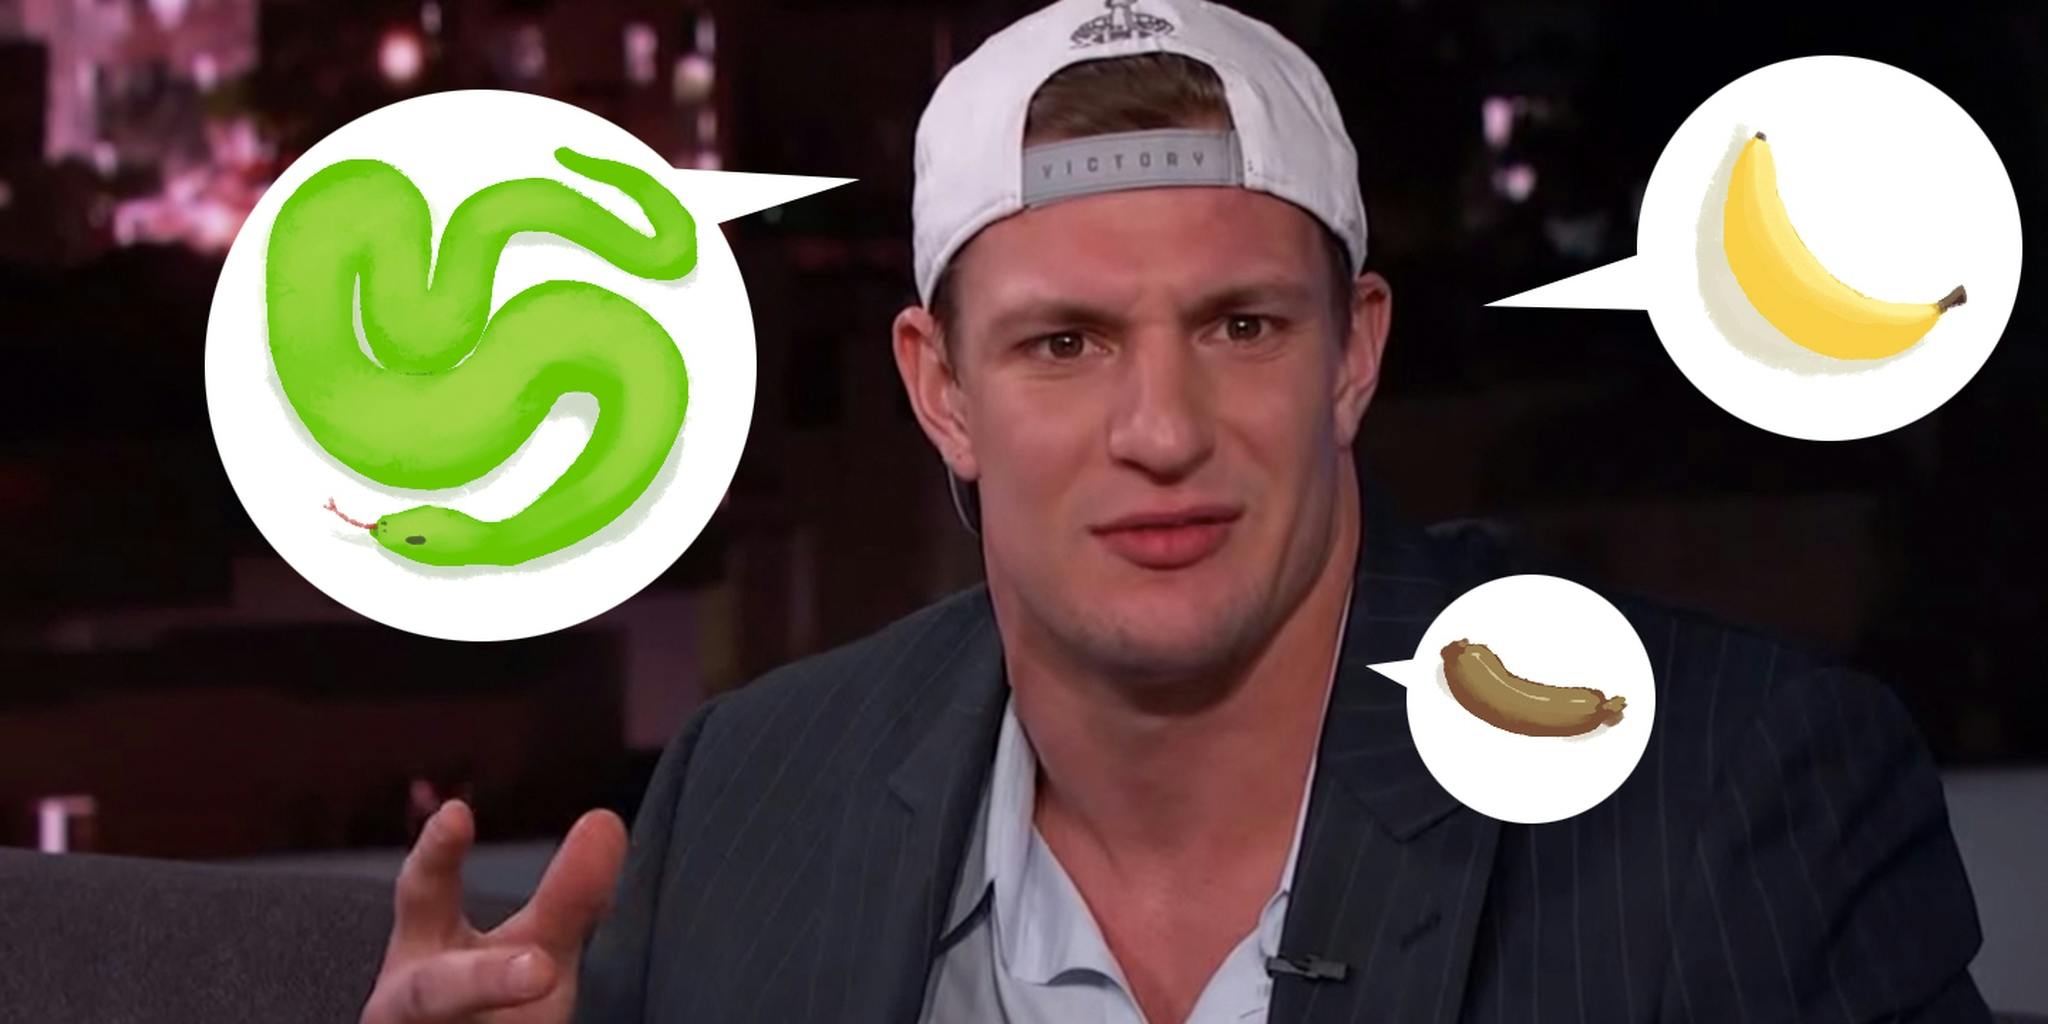 We read the new erotic Rob Gronkowski ebook so you don’t have to